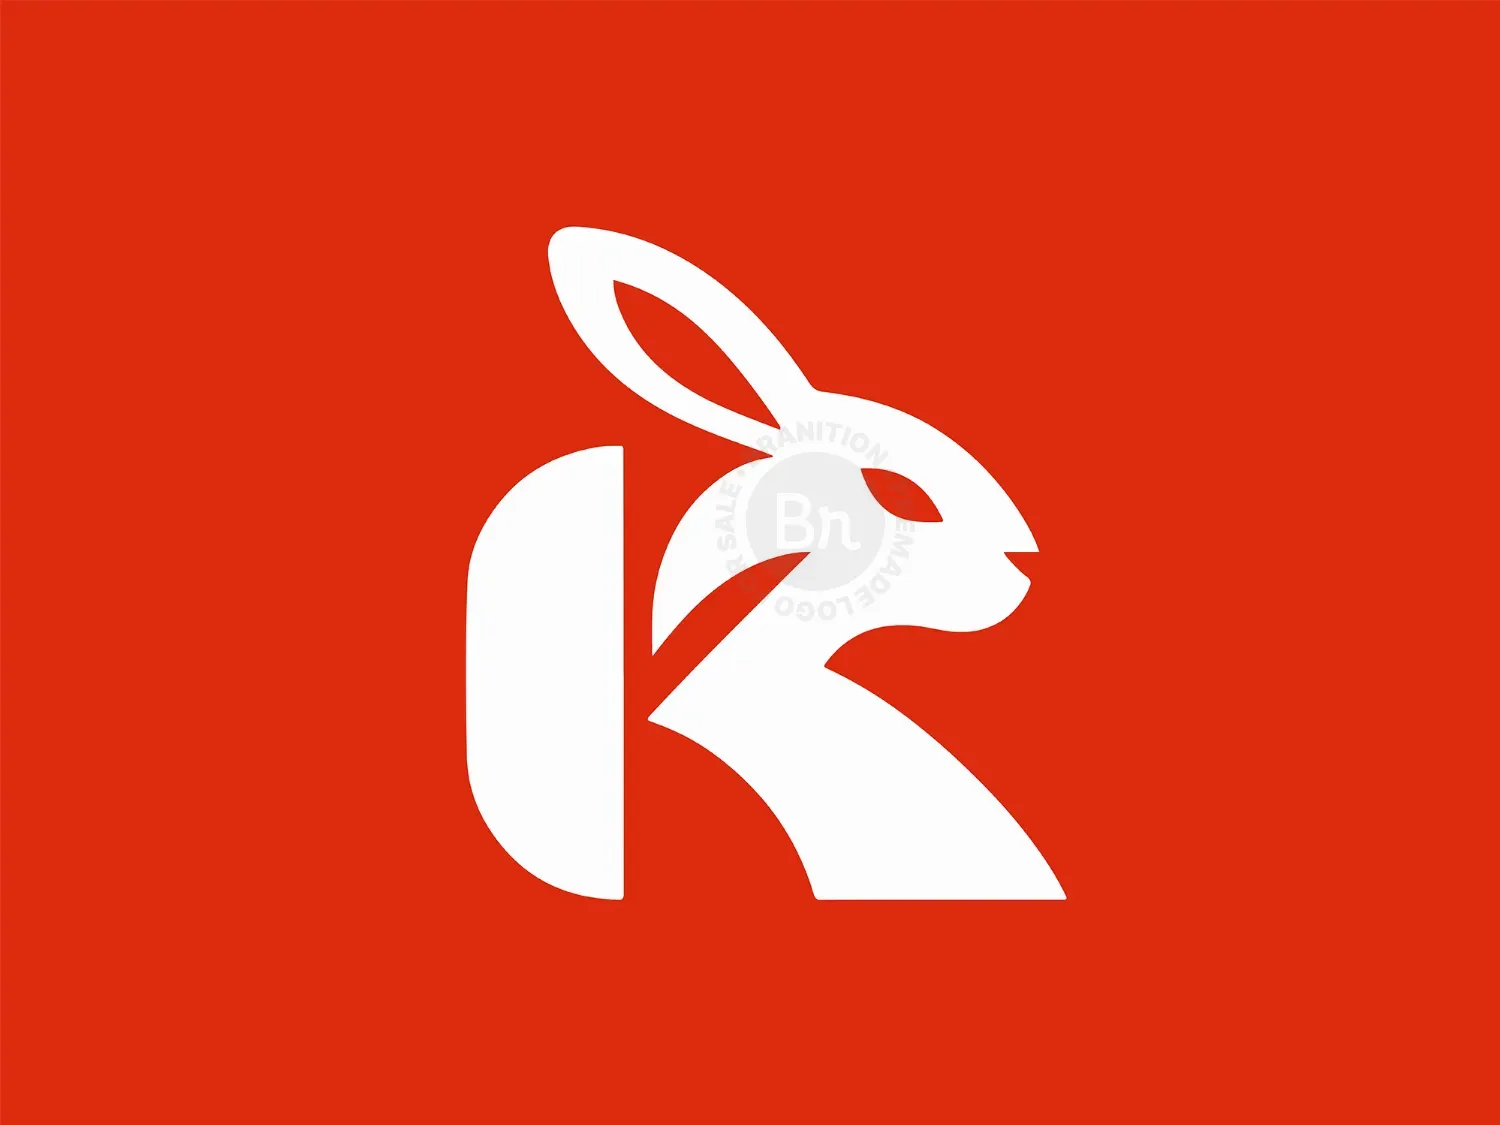 Abstract Letter K With Rabbit Head Logo